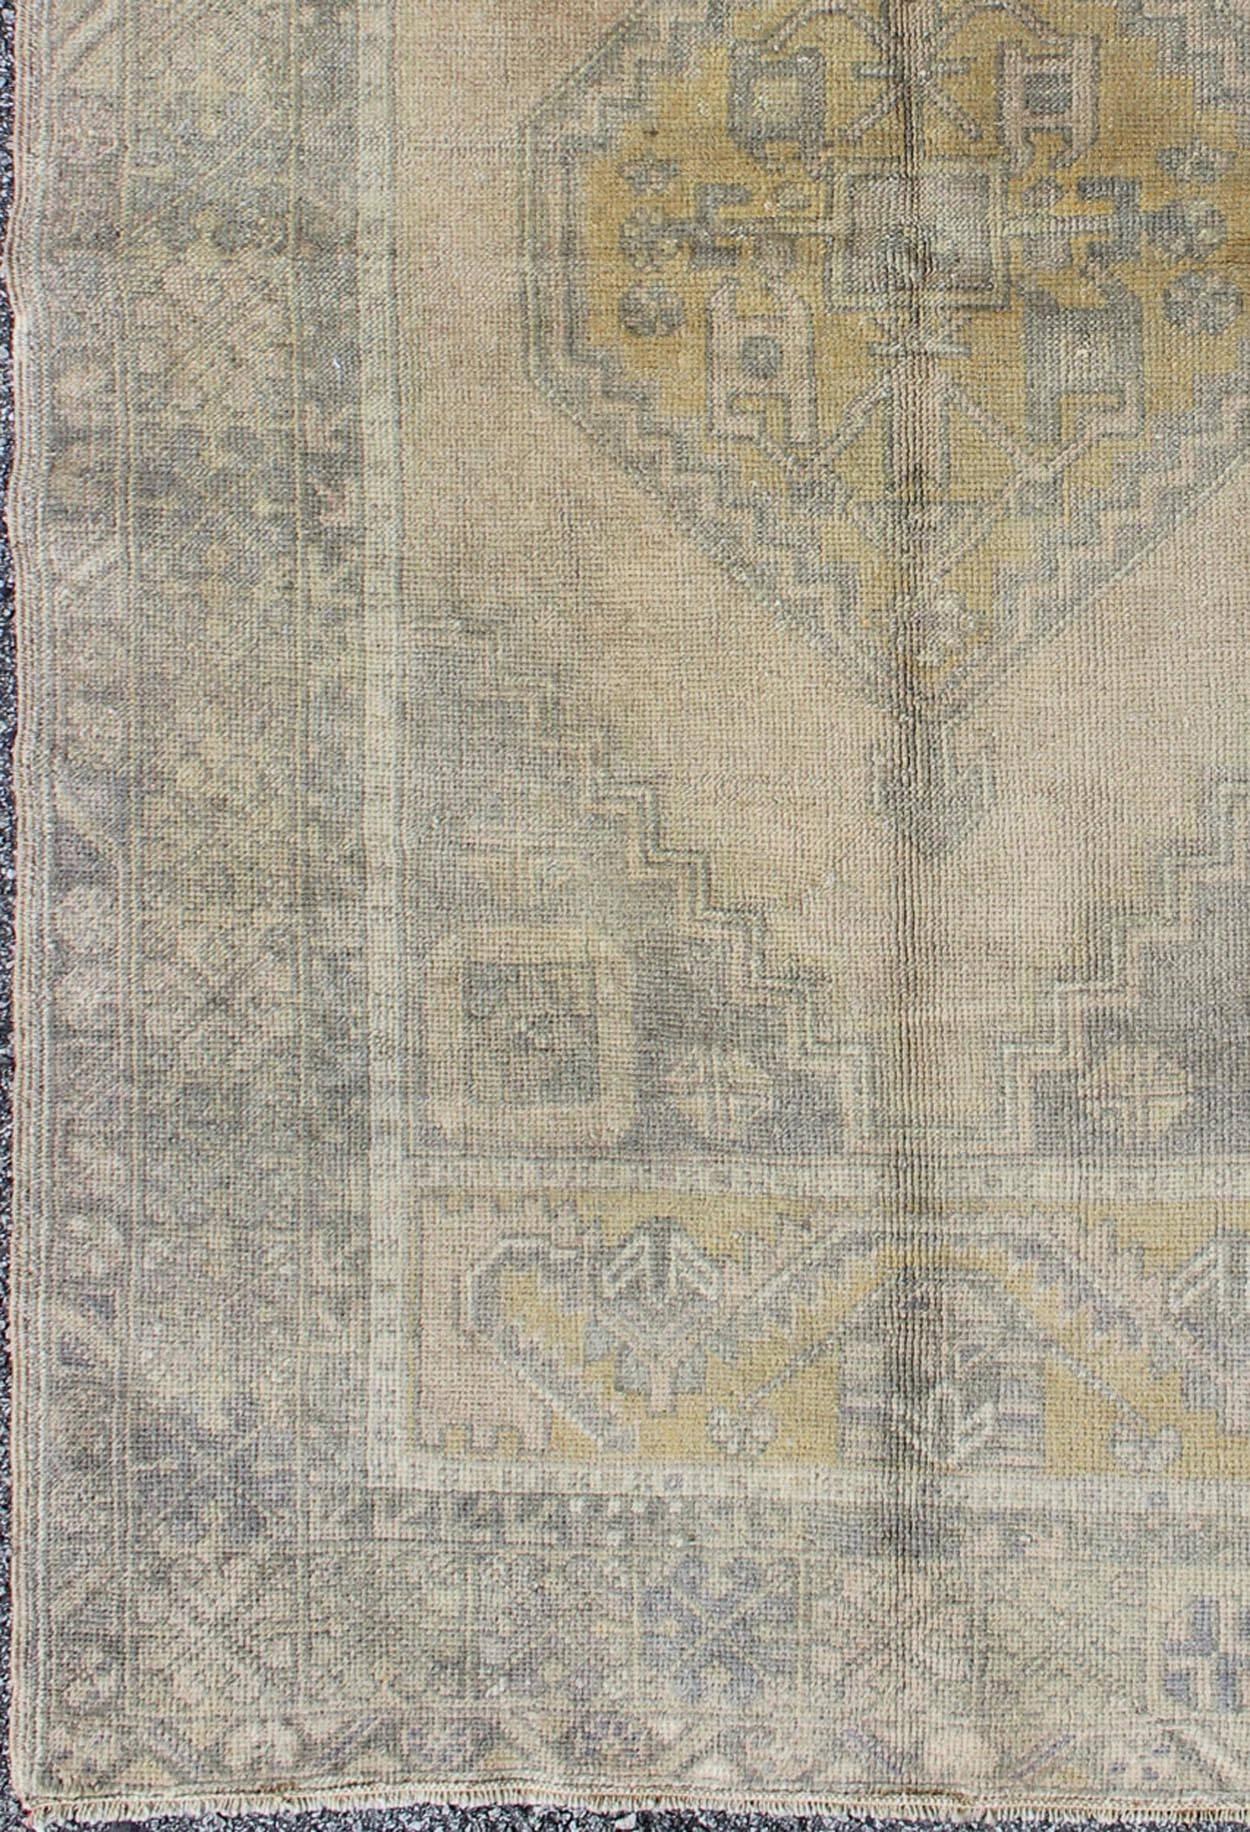 Muted Mid-Century Turkish Oushak rug with tribal geometric medallion design, rug mte-95069, country of origin / type: Turkey / Oushak, circa mid-20th century

This faded vintage Turkish Oushak carpet (circa mid-20th century) features a central